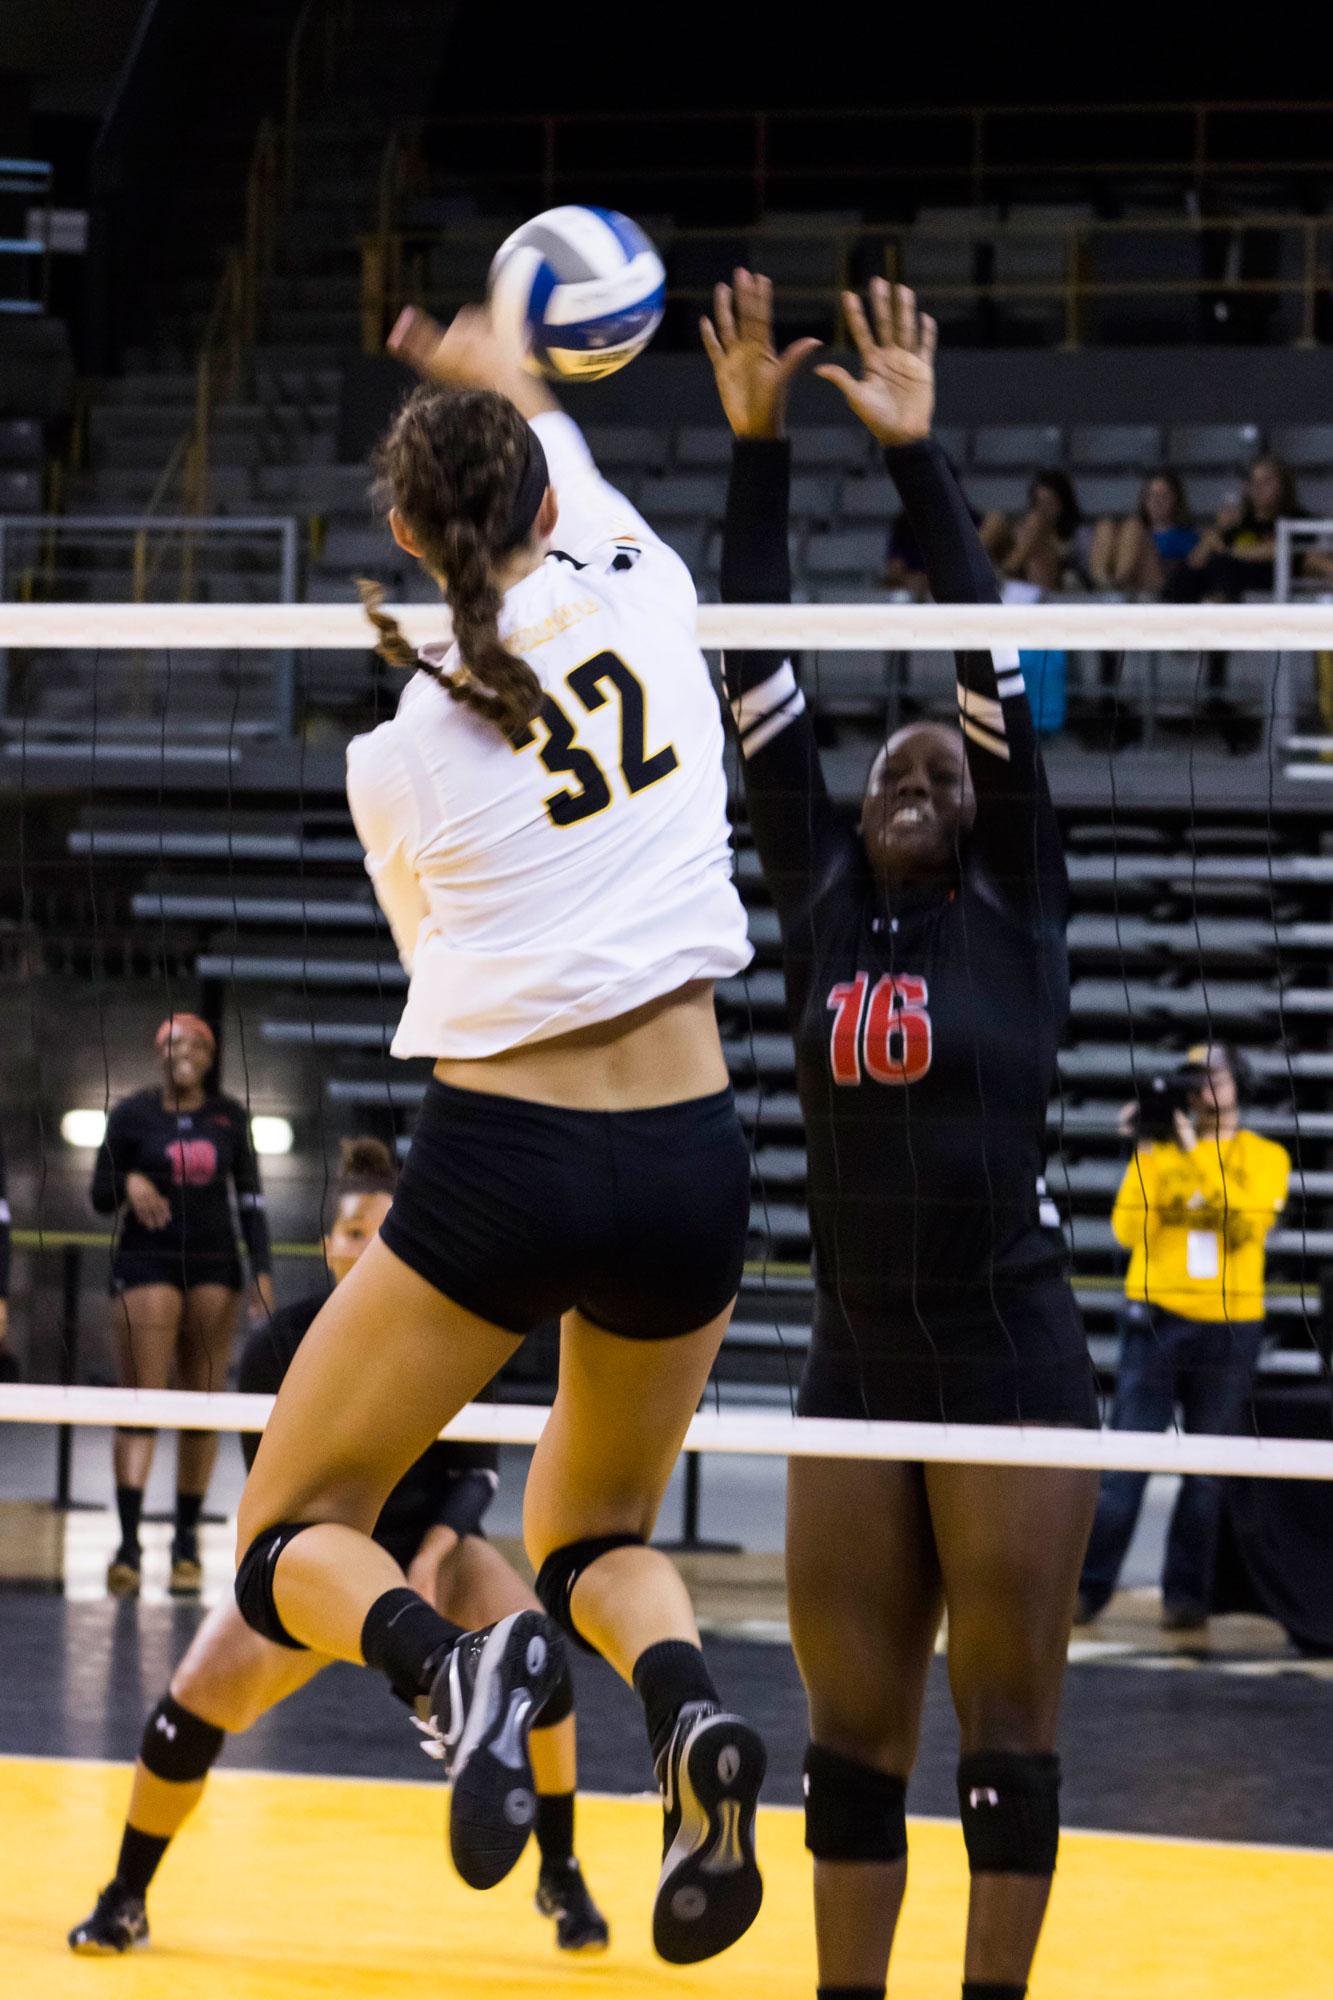 Senior outside hitter Jess Keller spikes the ball down during the first game of the season versus Gardner-Webb on Tuesday night. App State secured a 3-0 win over Gardner-Webb. | Photo: Halle Keighton